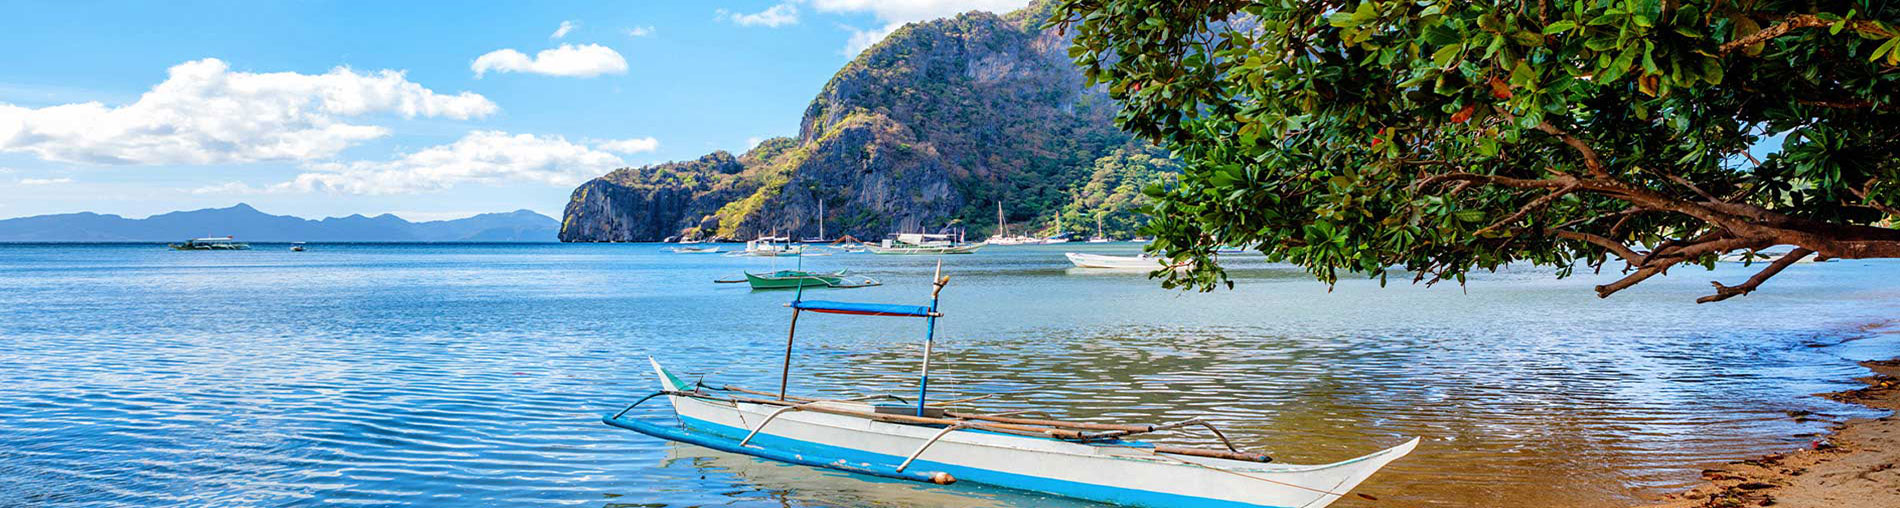 Palawan, Philippines Tour Package From India